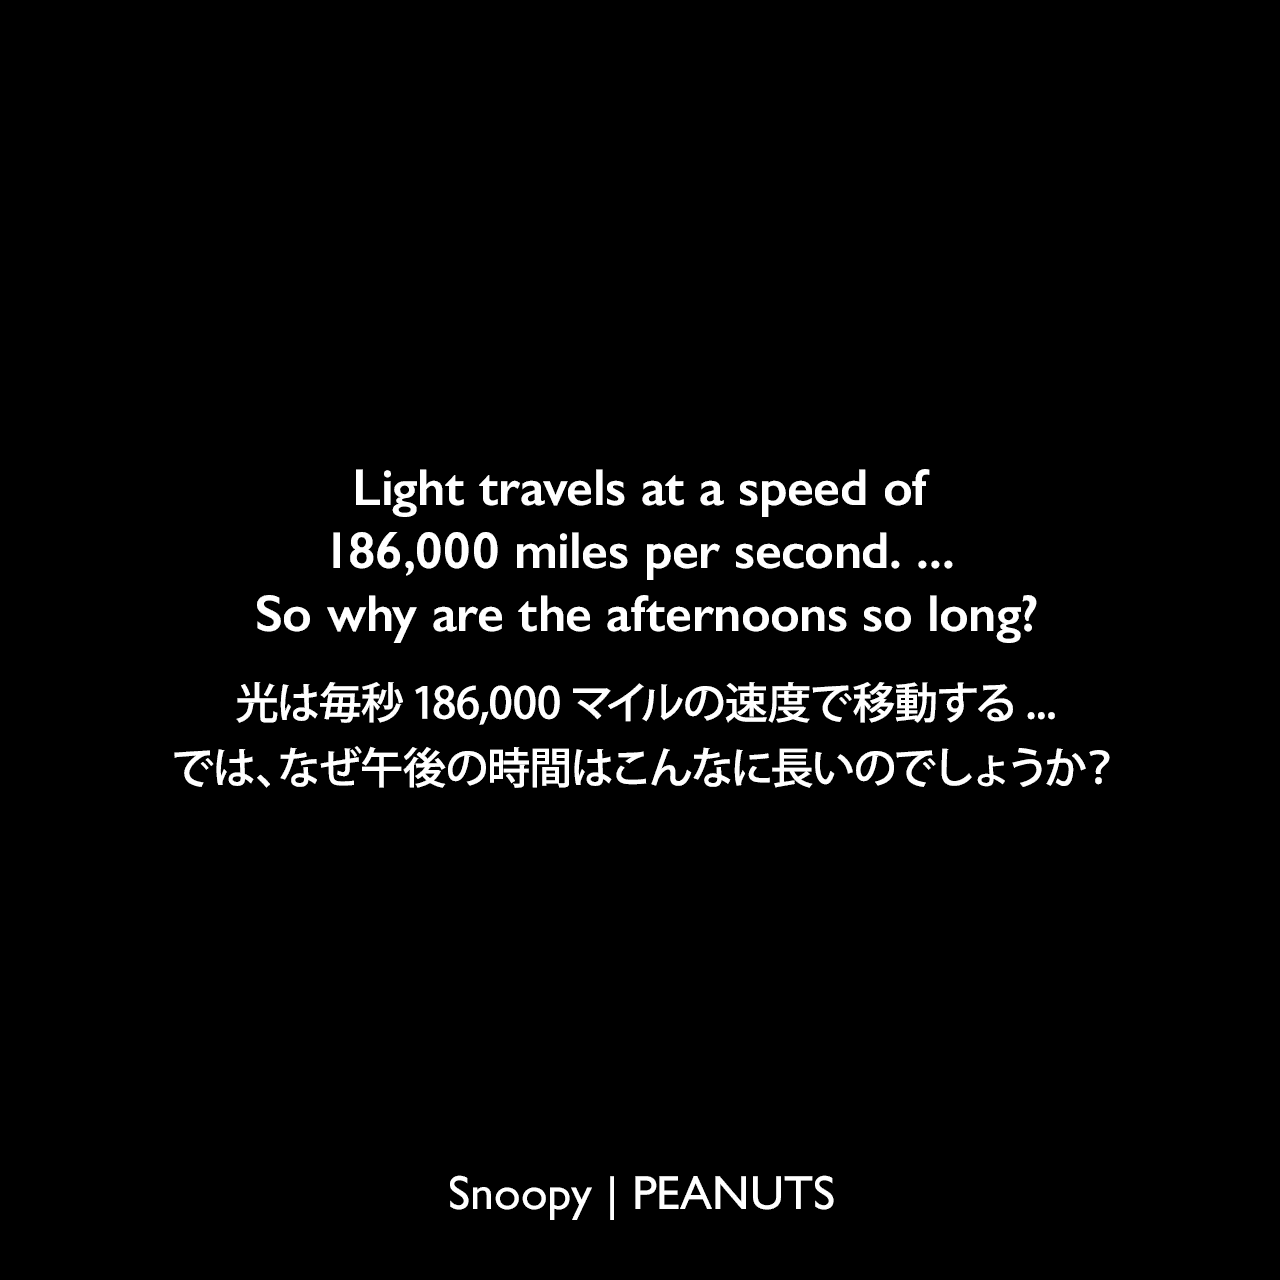 Light travels at a speed of 186,000 miles per second. ... So why are the afternoons so long?光は毎秒186,000マイルの速度で移動する... では、なぜ午後の時間はこんなに長いのでしょうか？- サリーの学校のレポート (1976年6月1日のコミック)Charles Monroe Schulz